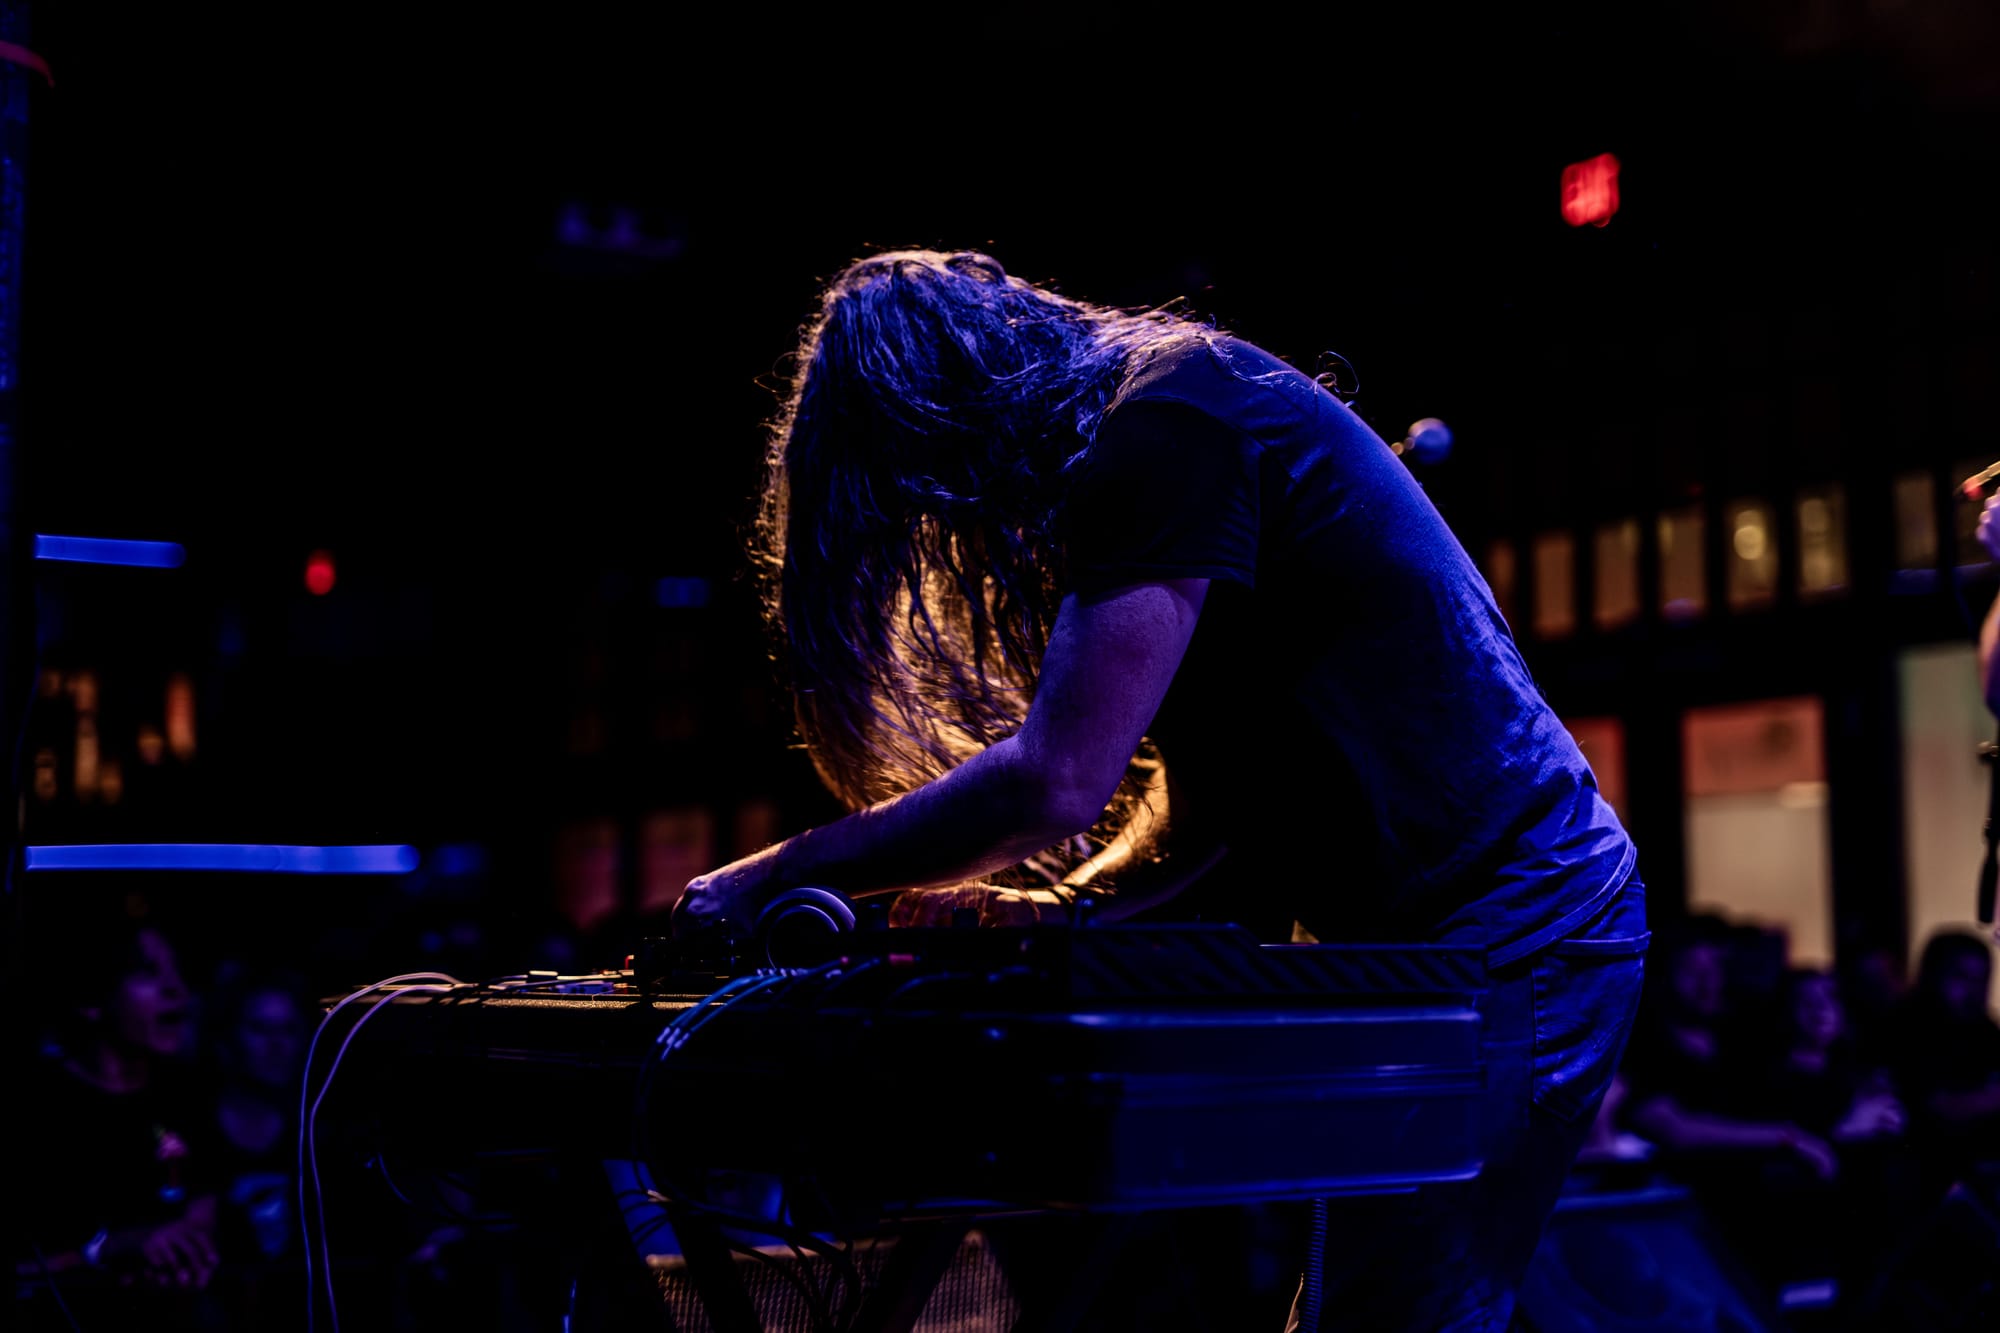 Emery live at the Vinyl Music Hall (photos by Moth)